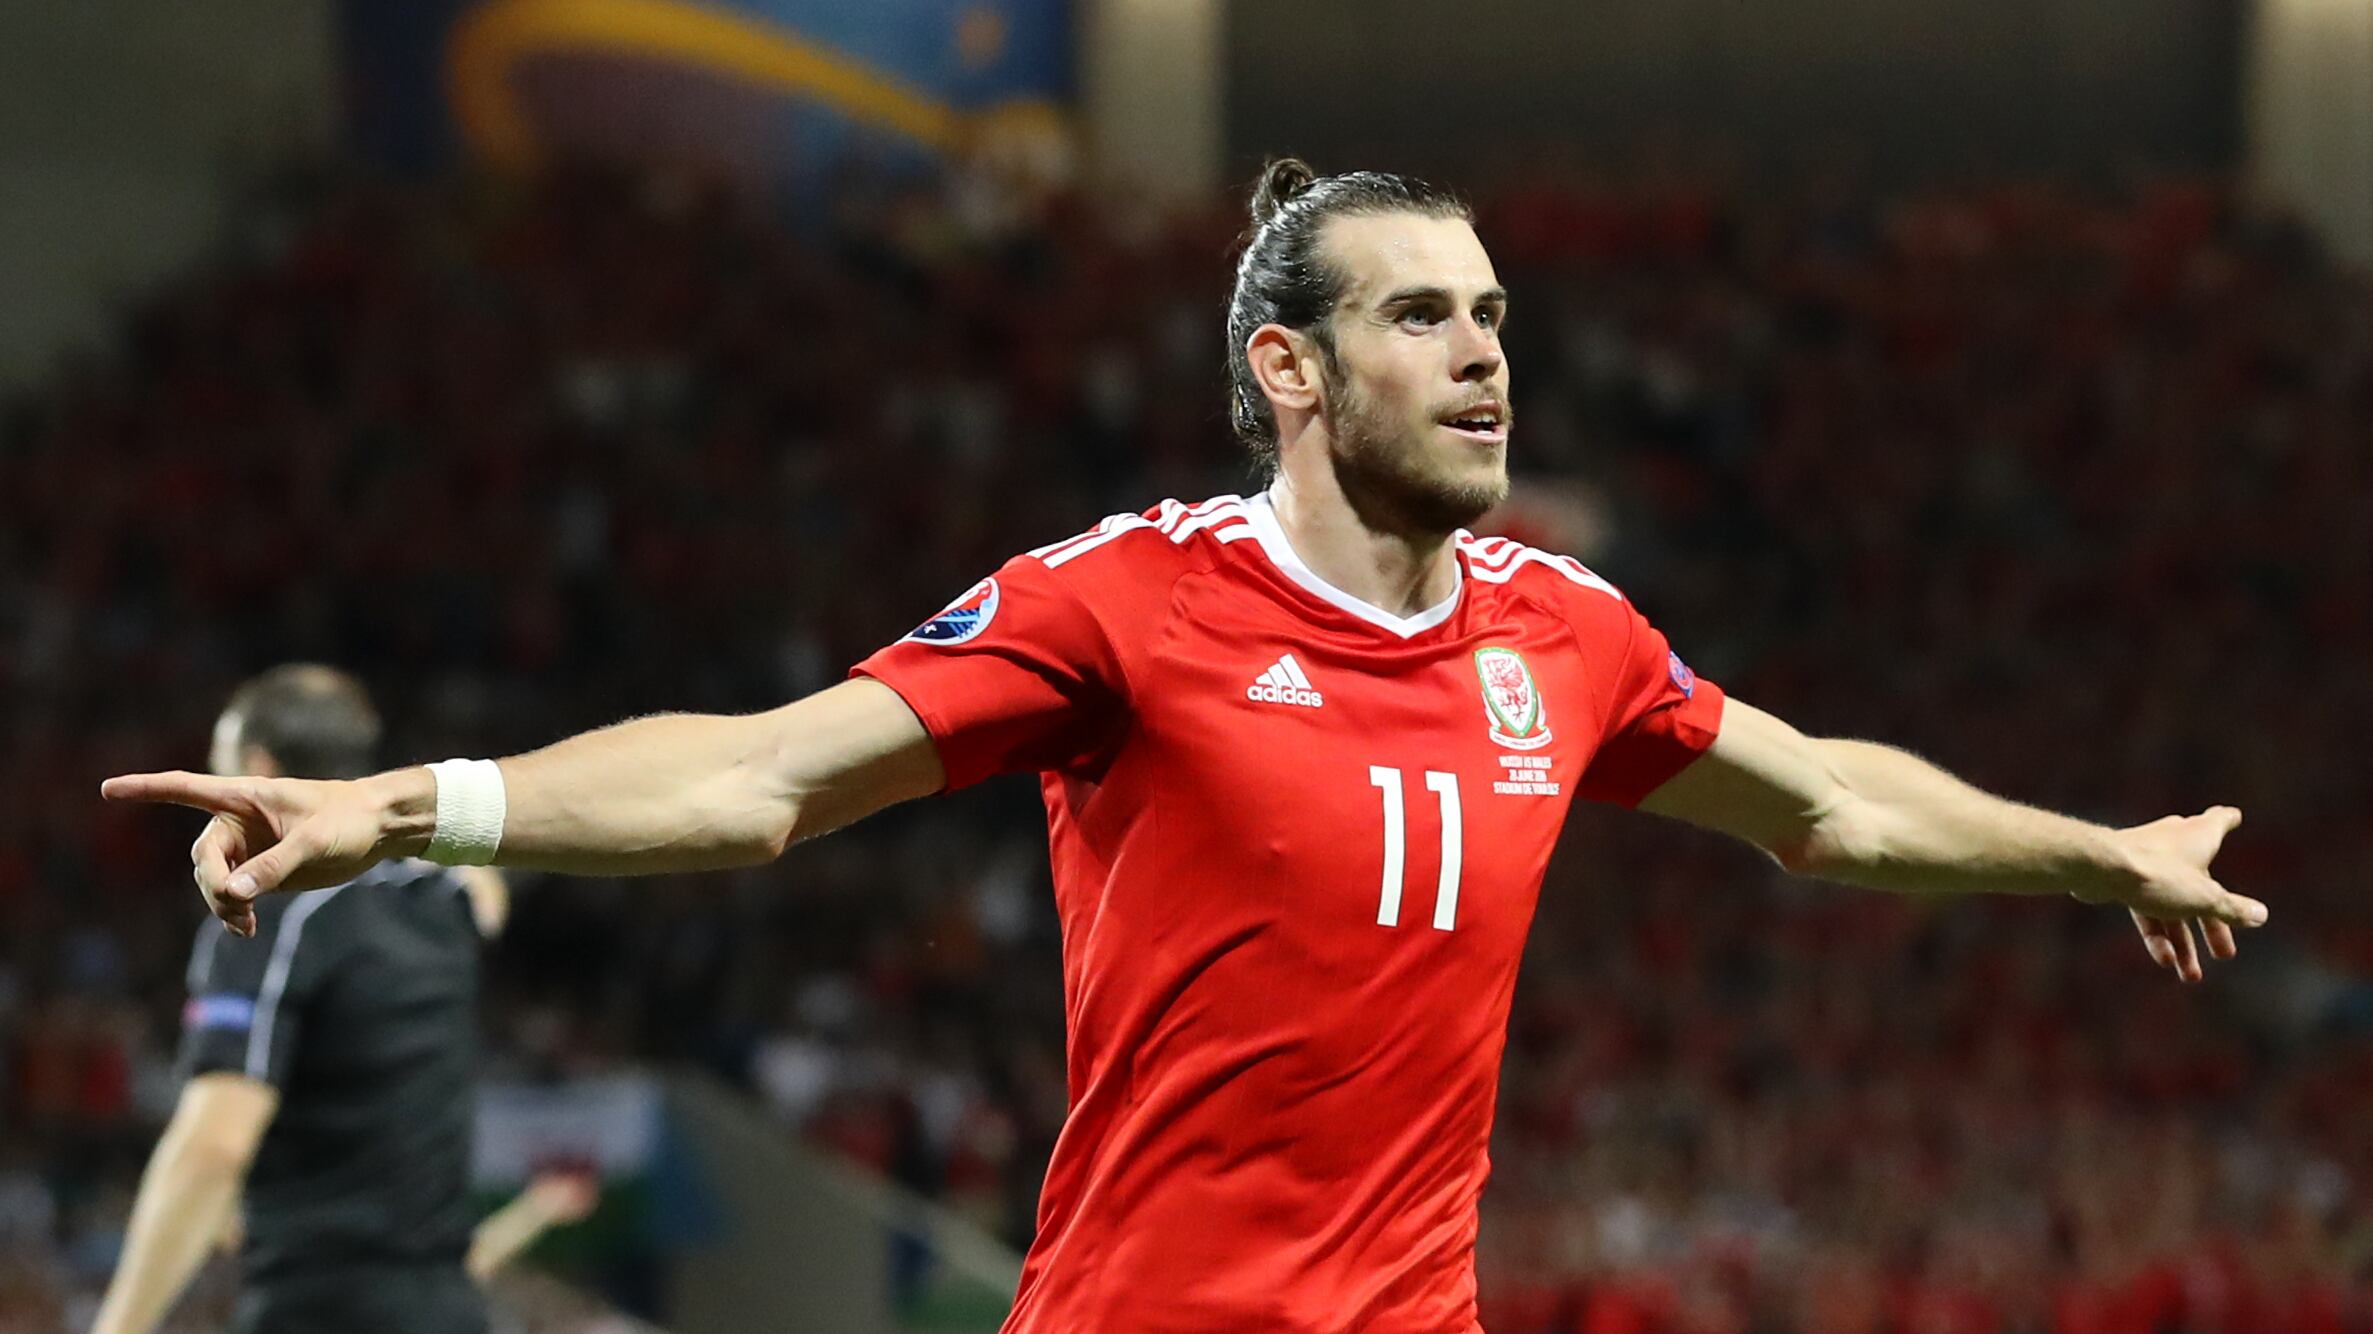 Wrexham have been trying to tempt Gareth Bale out of retirement